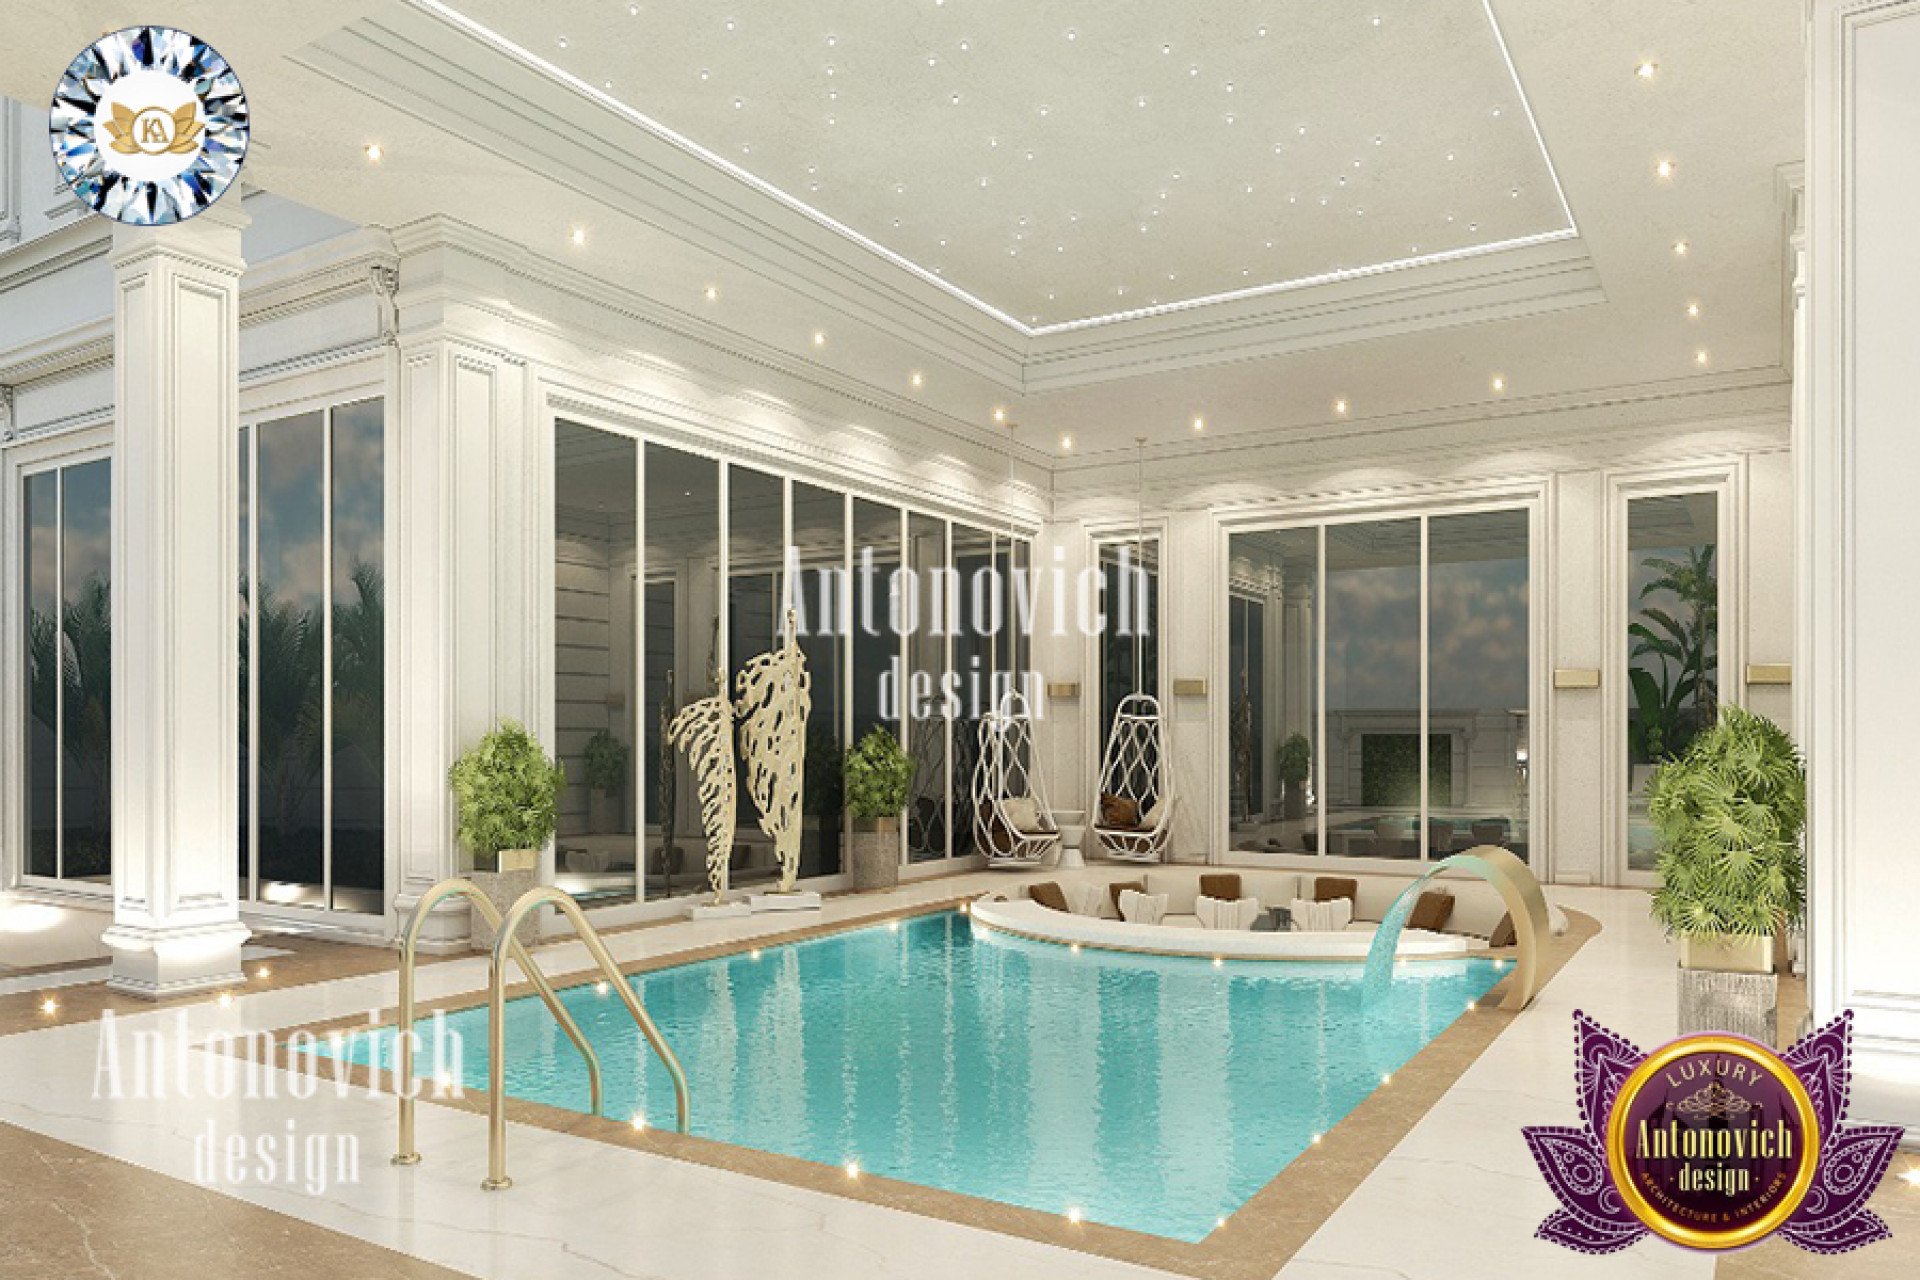 IDEAL SWIMMING POOL DESIGN FOR LUXURY HOME BY LUXURY ANTONOVICH DESIGN 